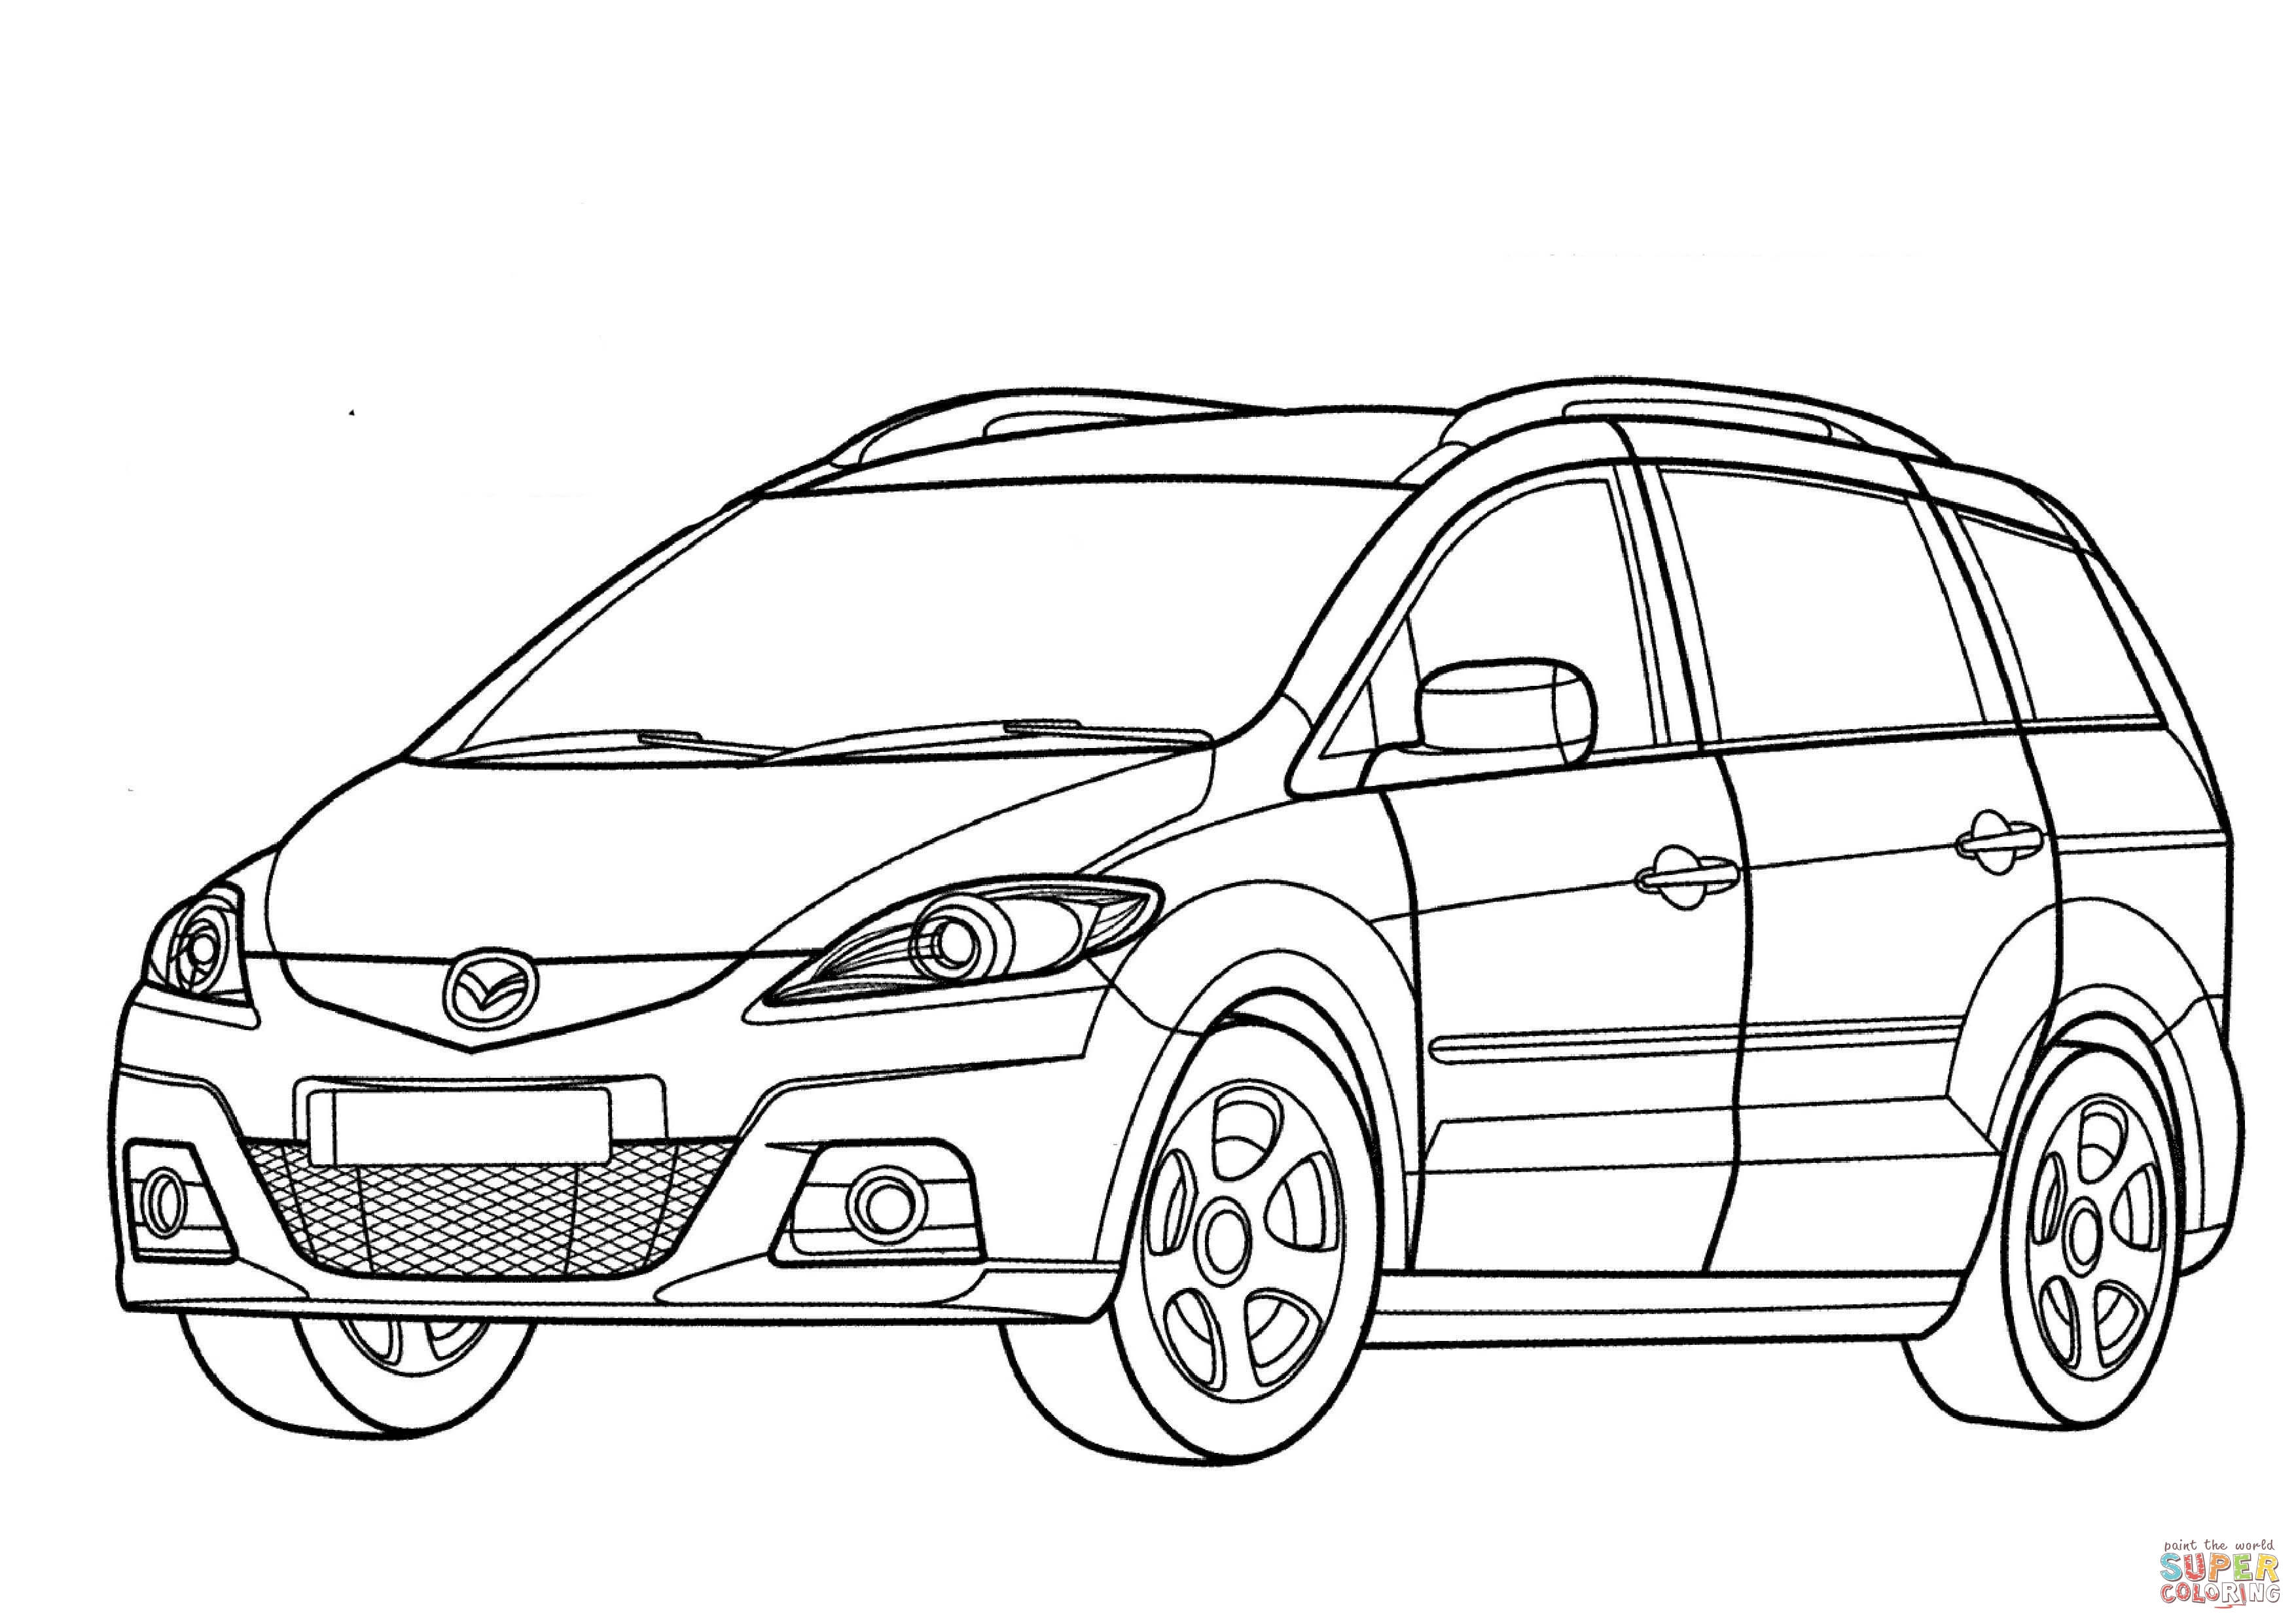 Mazda 5 coloring page | Free Printable Coloring Pages